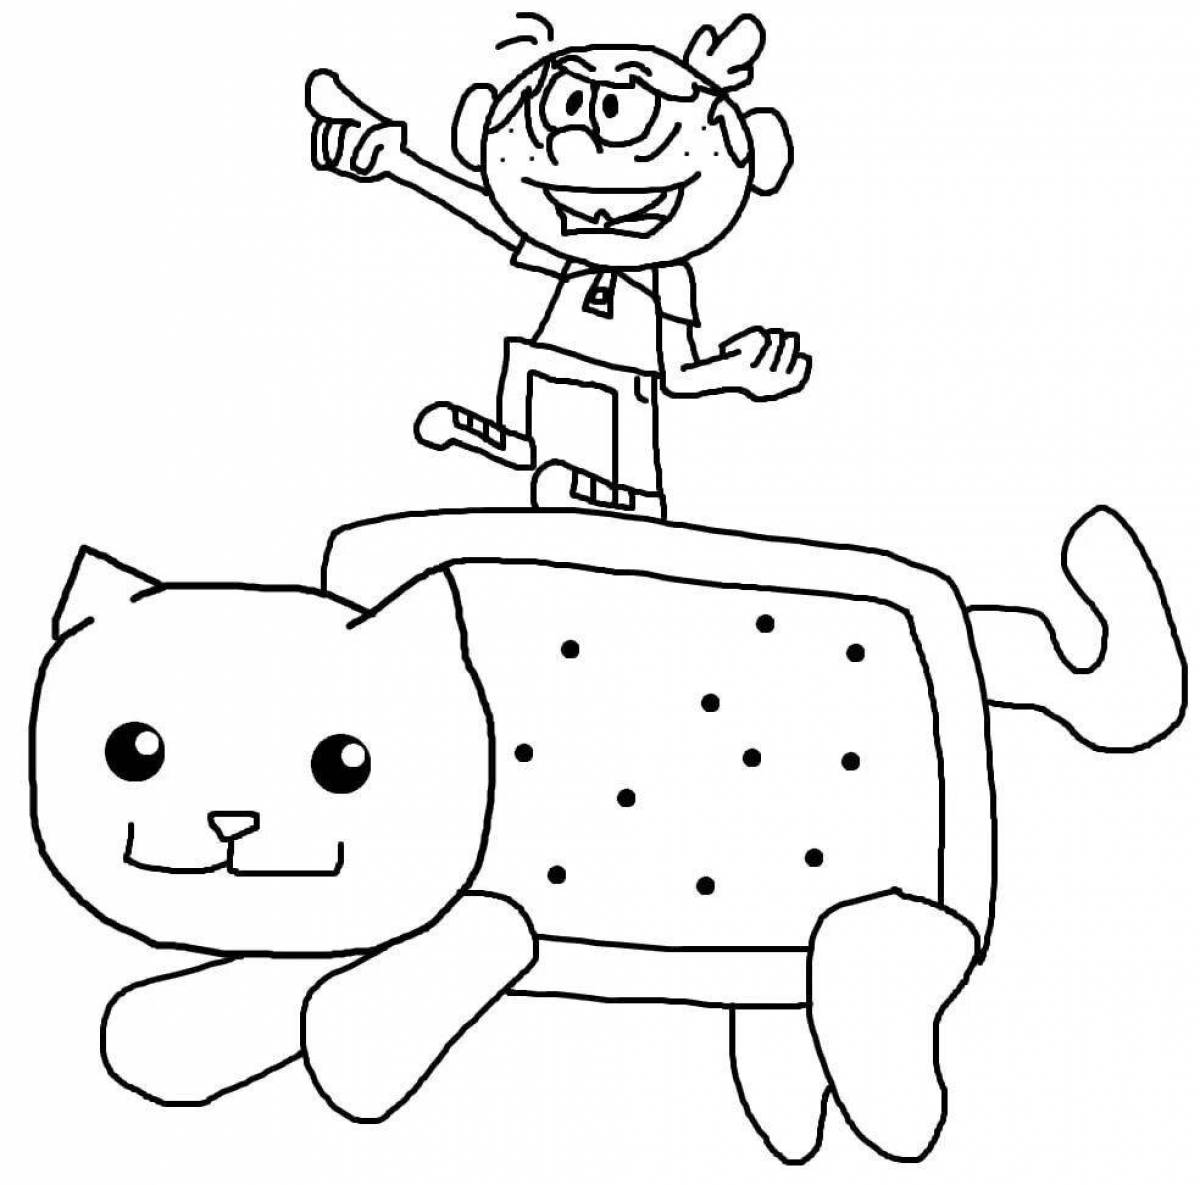 Curious yum cat coloring page